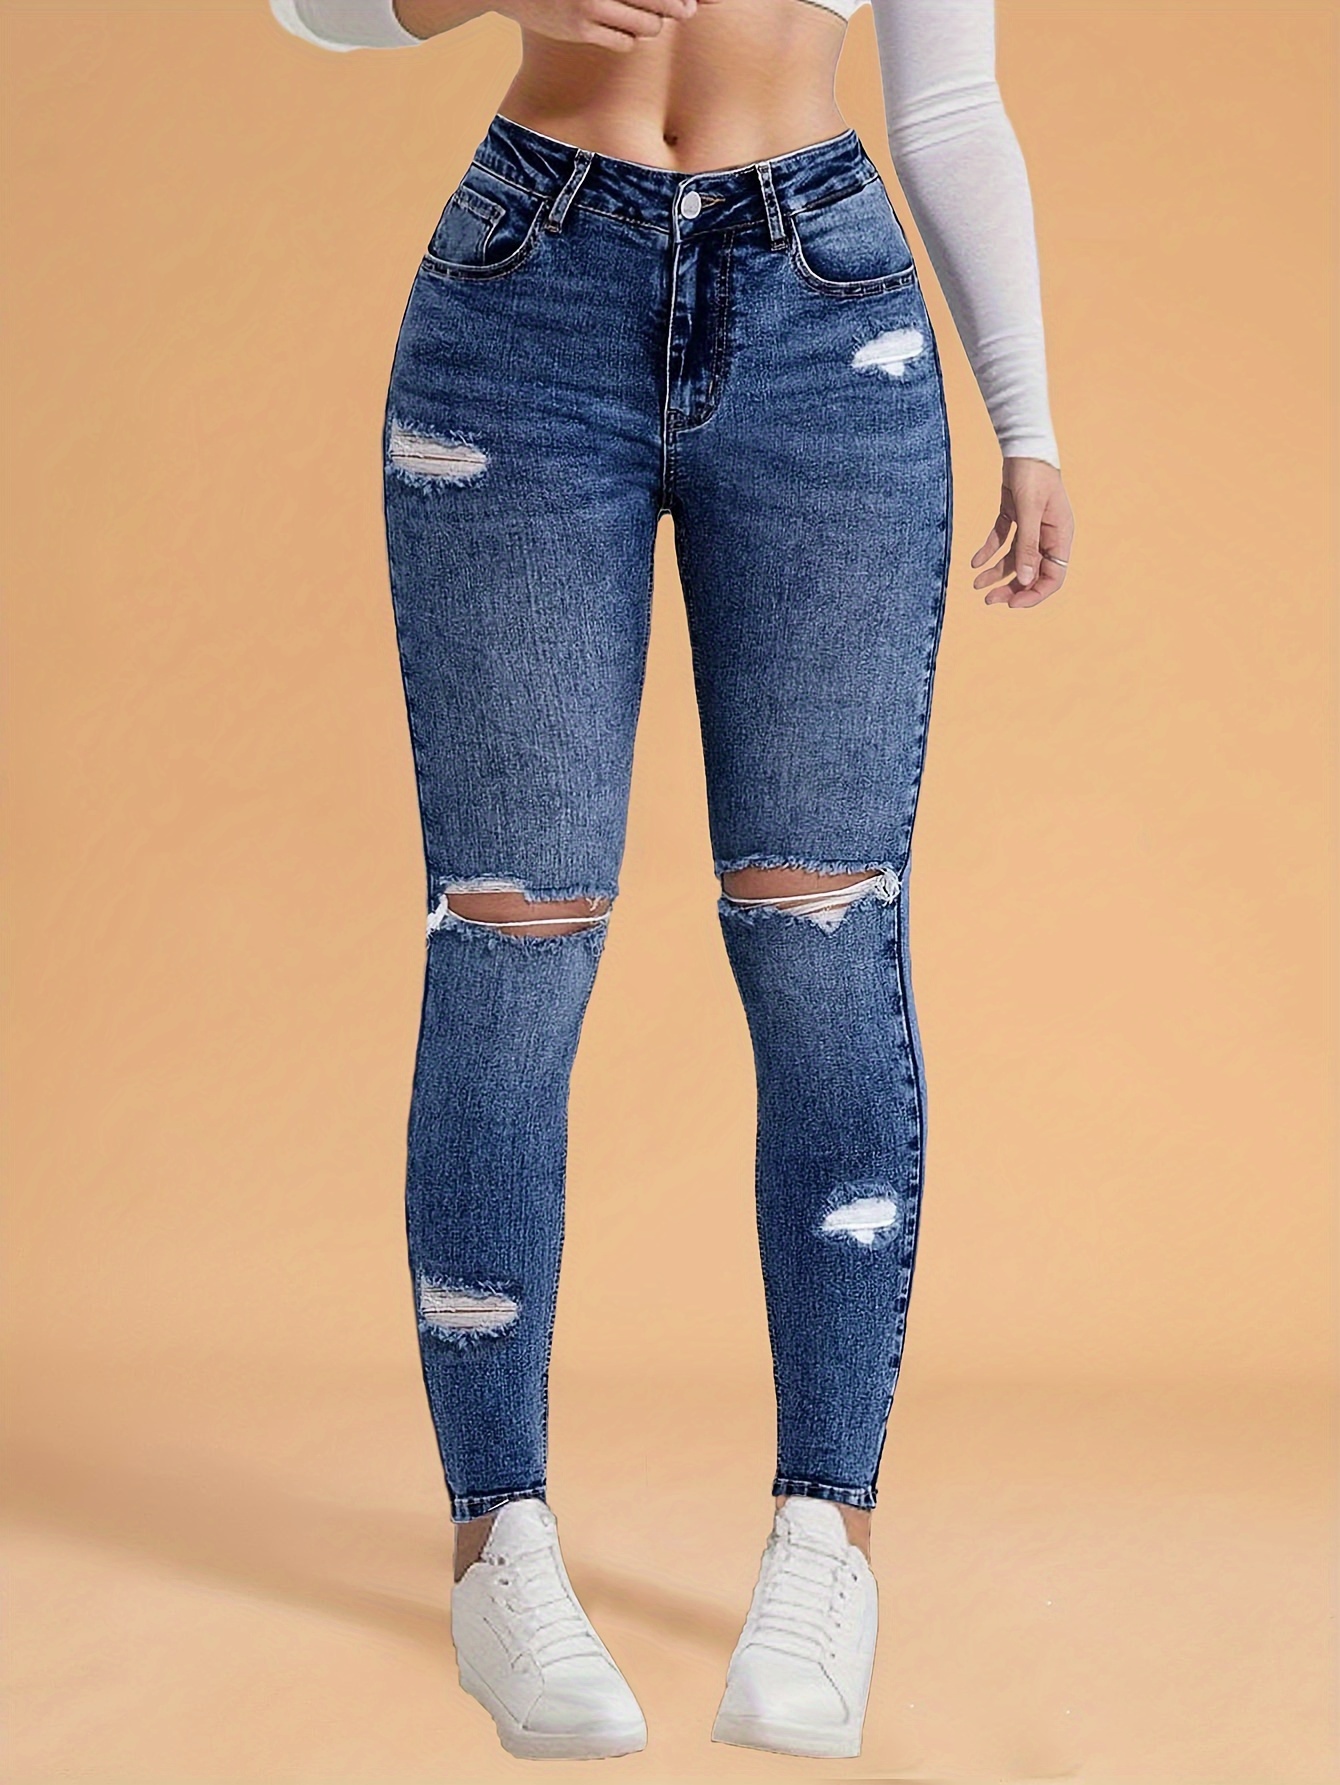 Ripped High * Skinny Jeans, Light Washed Blue Stretchy Sexy Distressed  Curvy Denim Pants, Women's Denim Jeans & Clothing